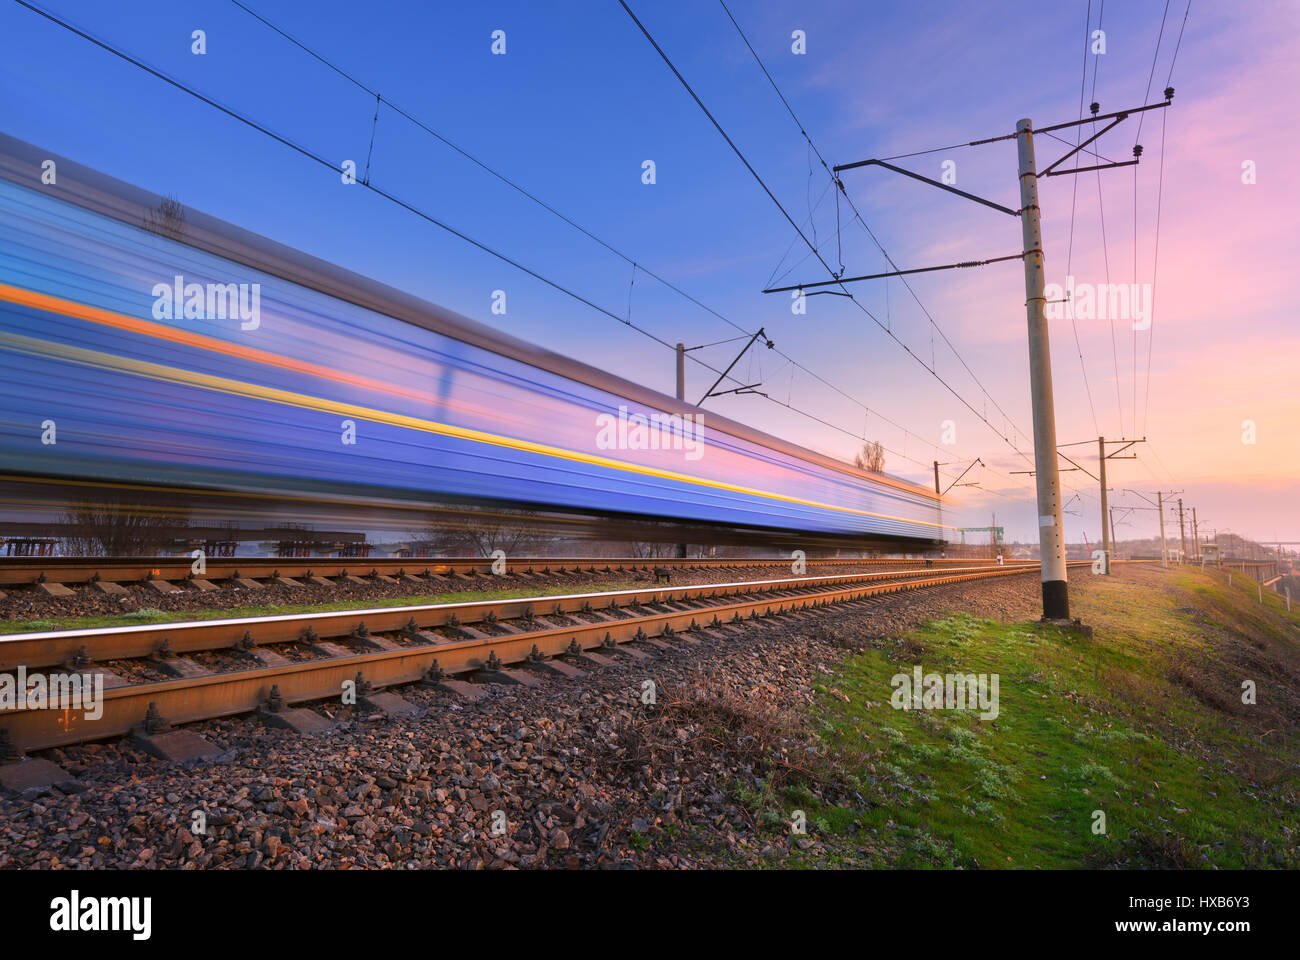 High speed passenger train in motion on railroad at sunset. Blurred commuter train. Railway station against colorful blue sky. Railroad travel, railwa Stock Photo